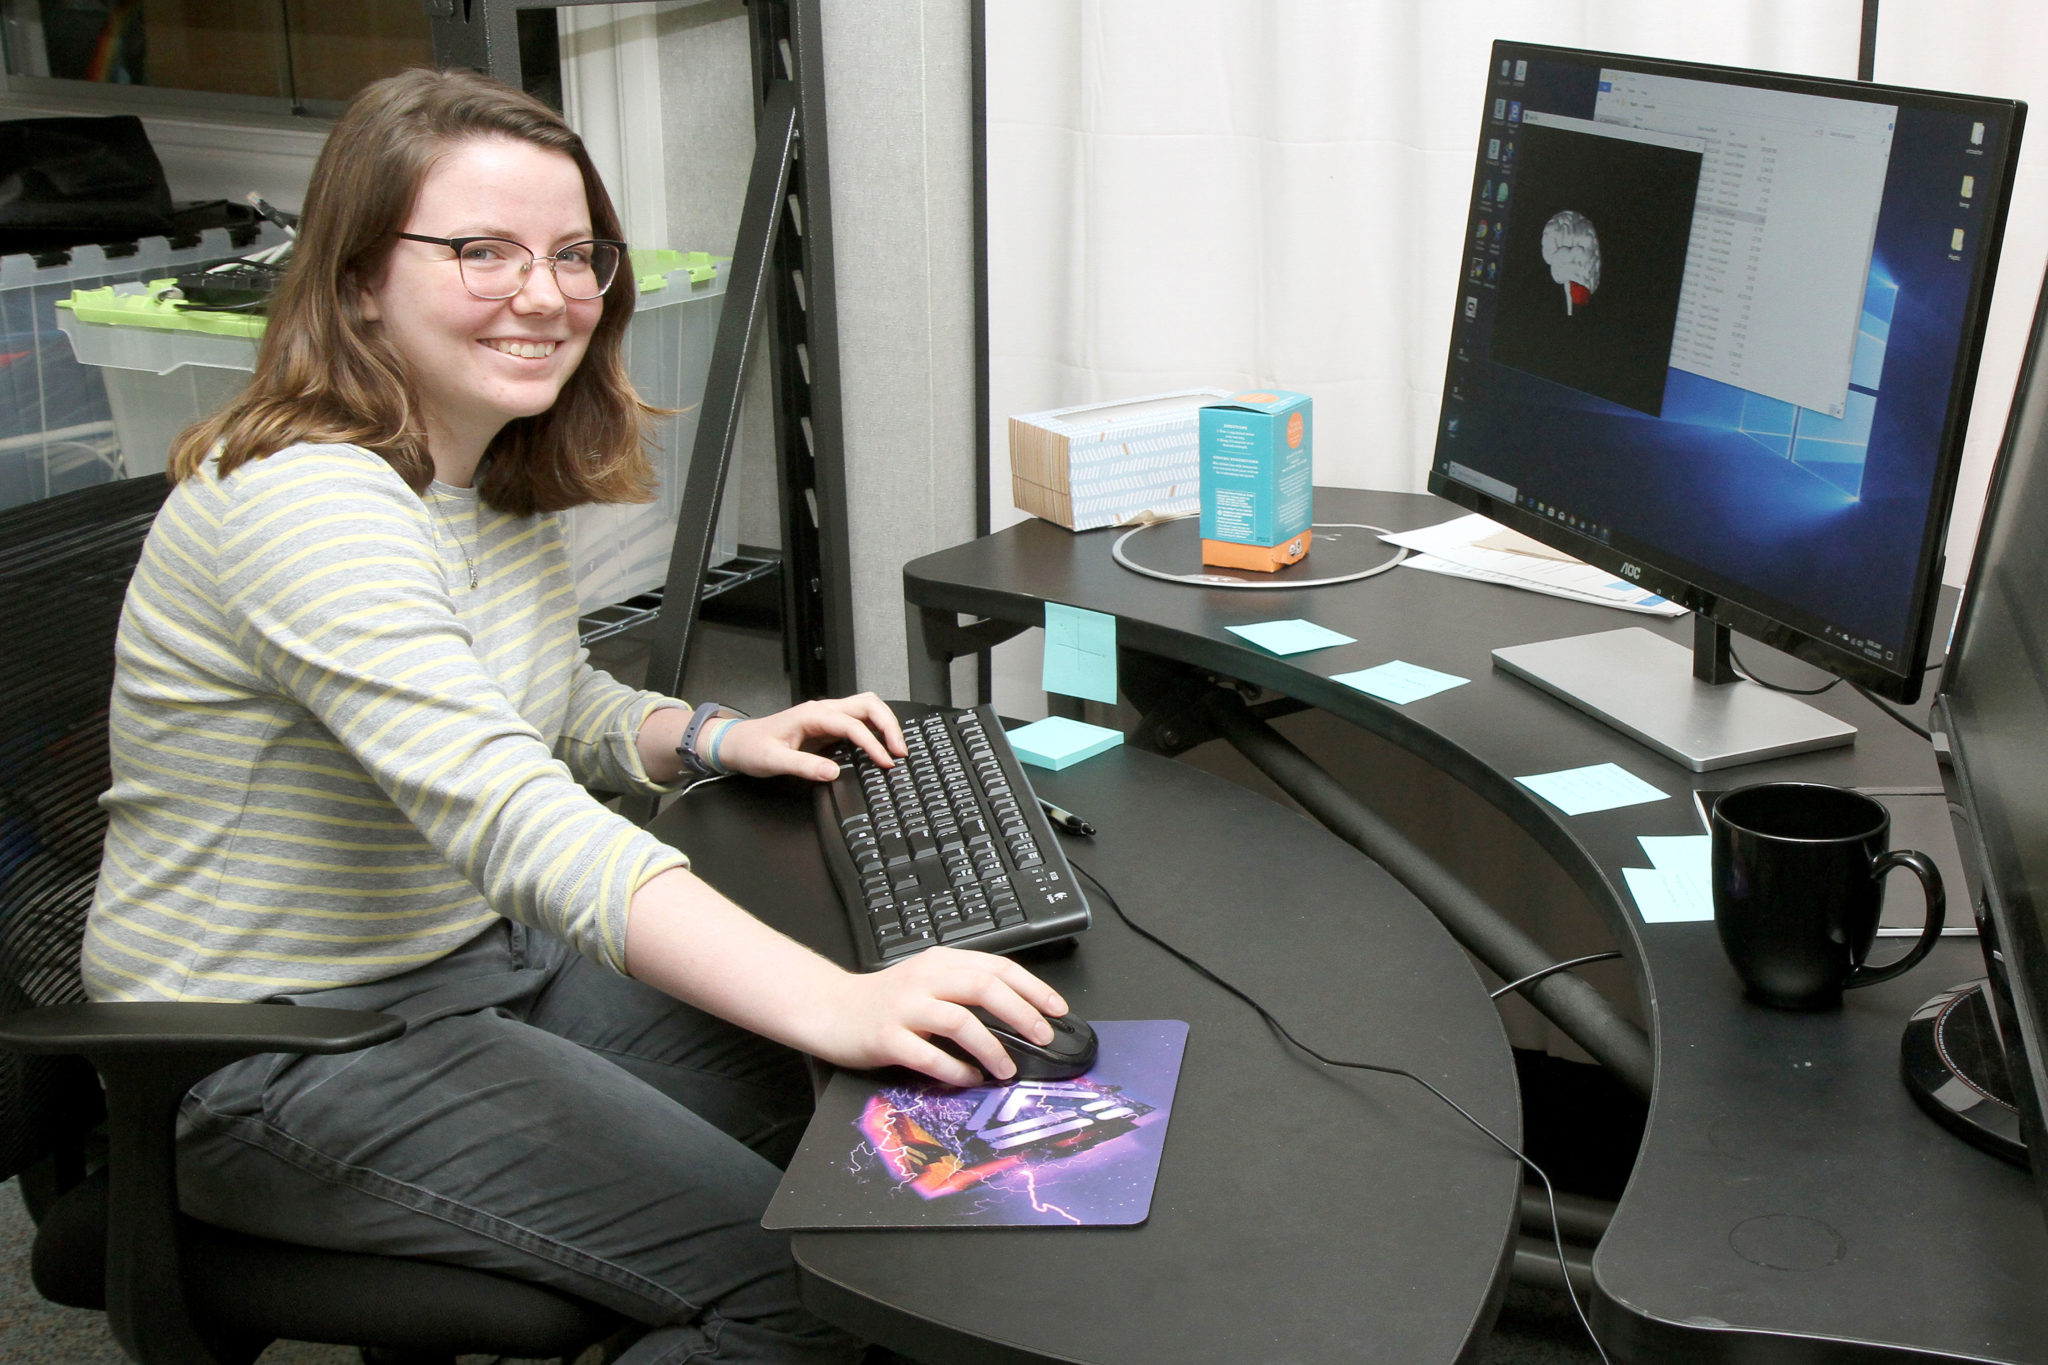 A Neuroscience student sits at a computer modeling a brain